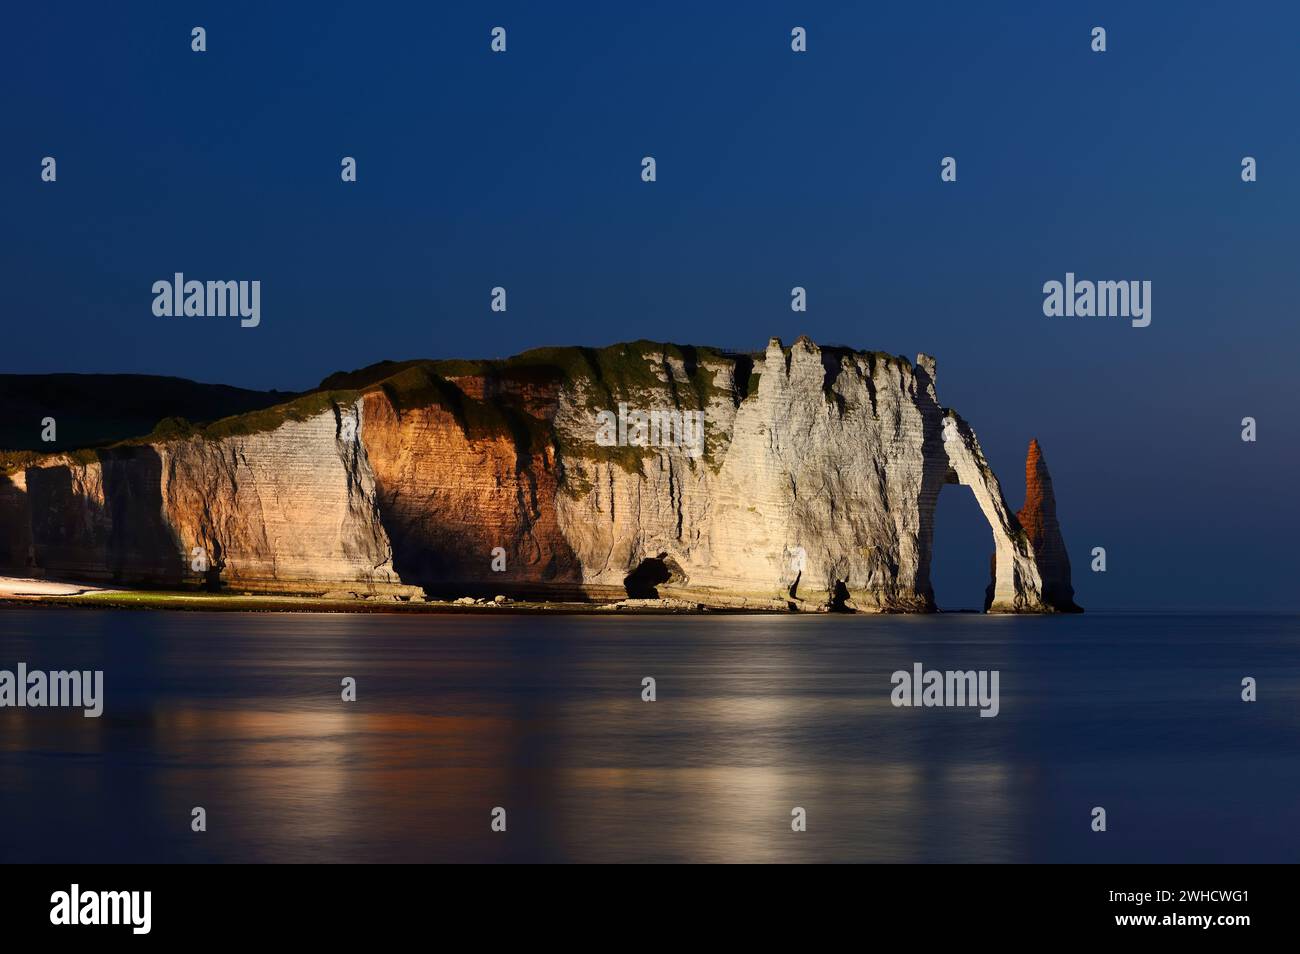 Steep cliffs with the Falaise d'Aval rock gate and the Aiguille díEtretat rock needle at night, Etretat, Alabaster Coast, Seine-Maritime, Normandy, France Stock Photo